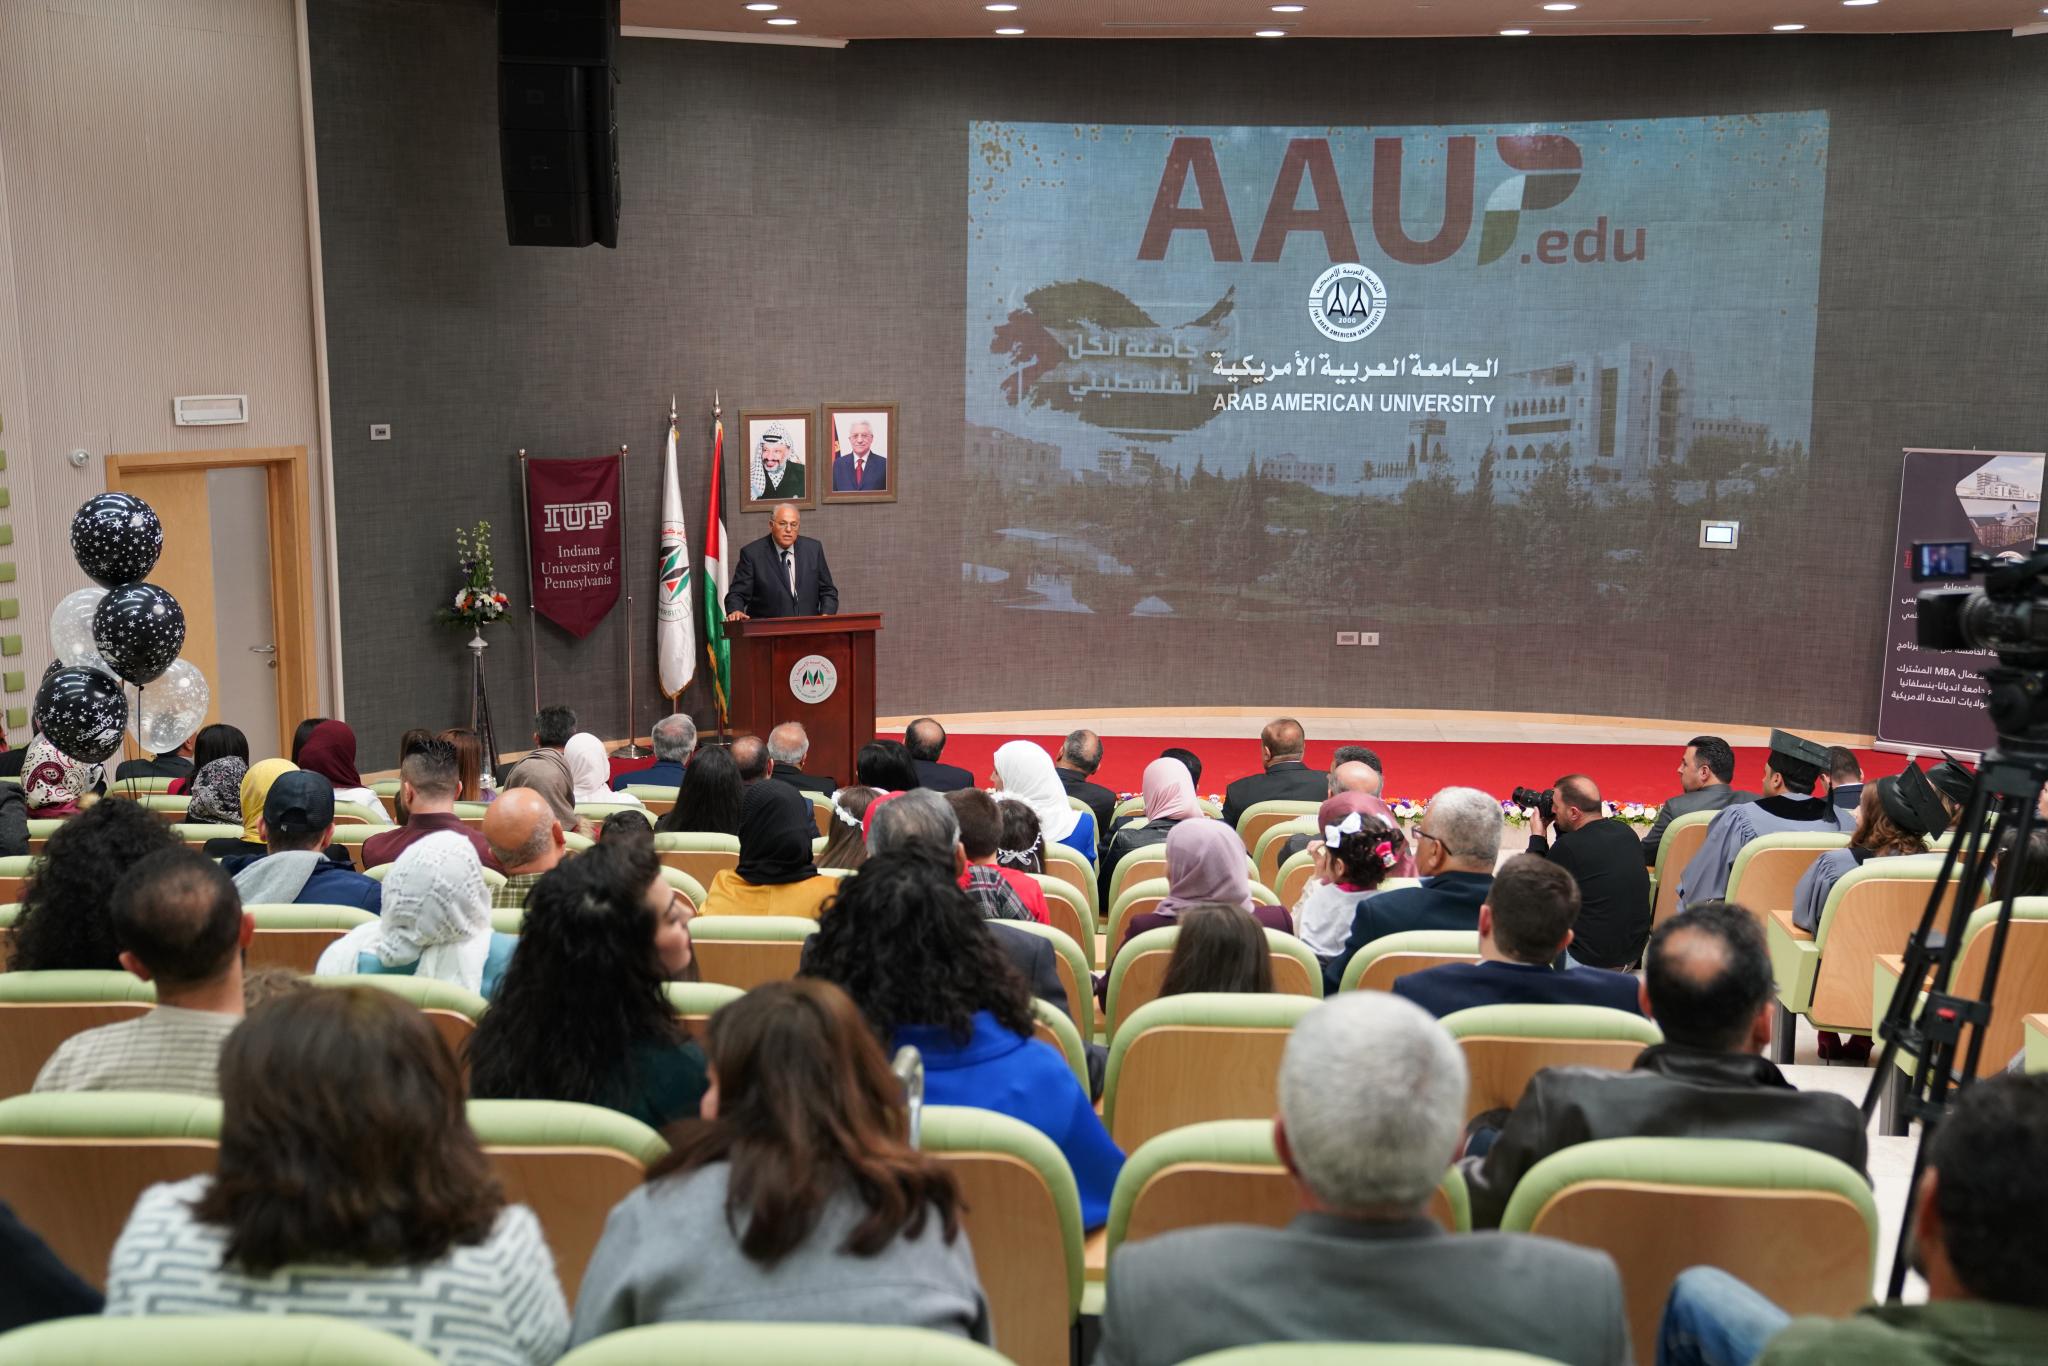 AAUP Celebrates Graduating the 5th Patch of MBA Students, the Joint Program with Indiana University